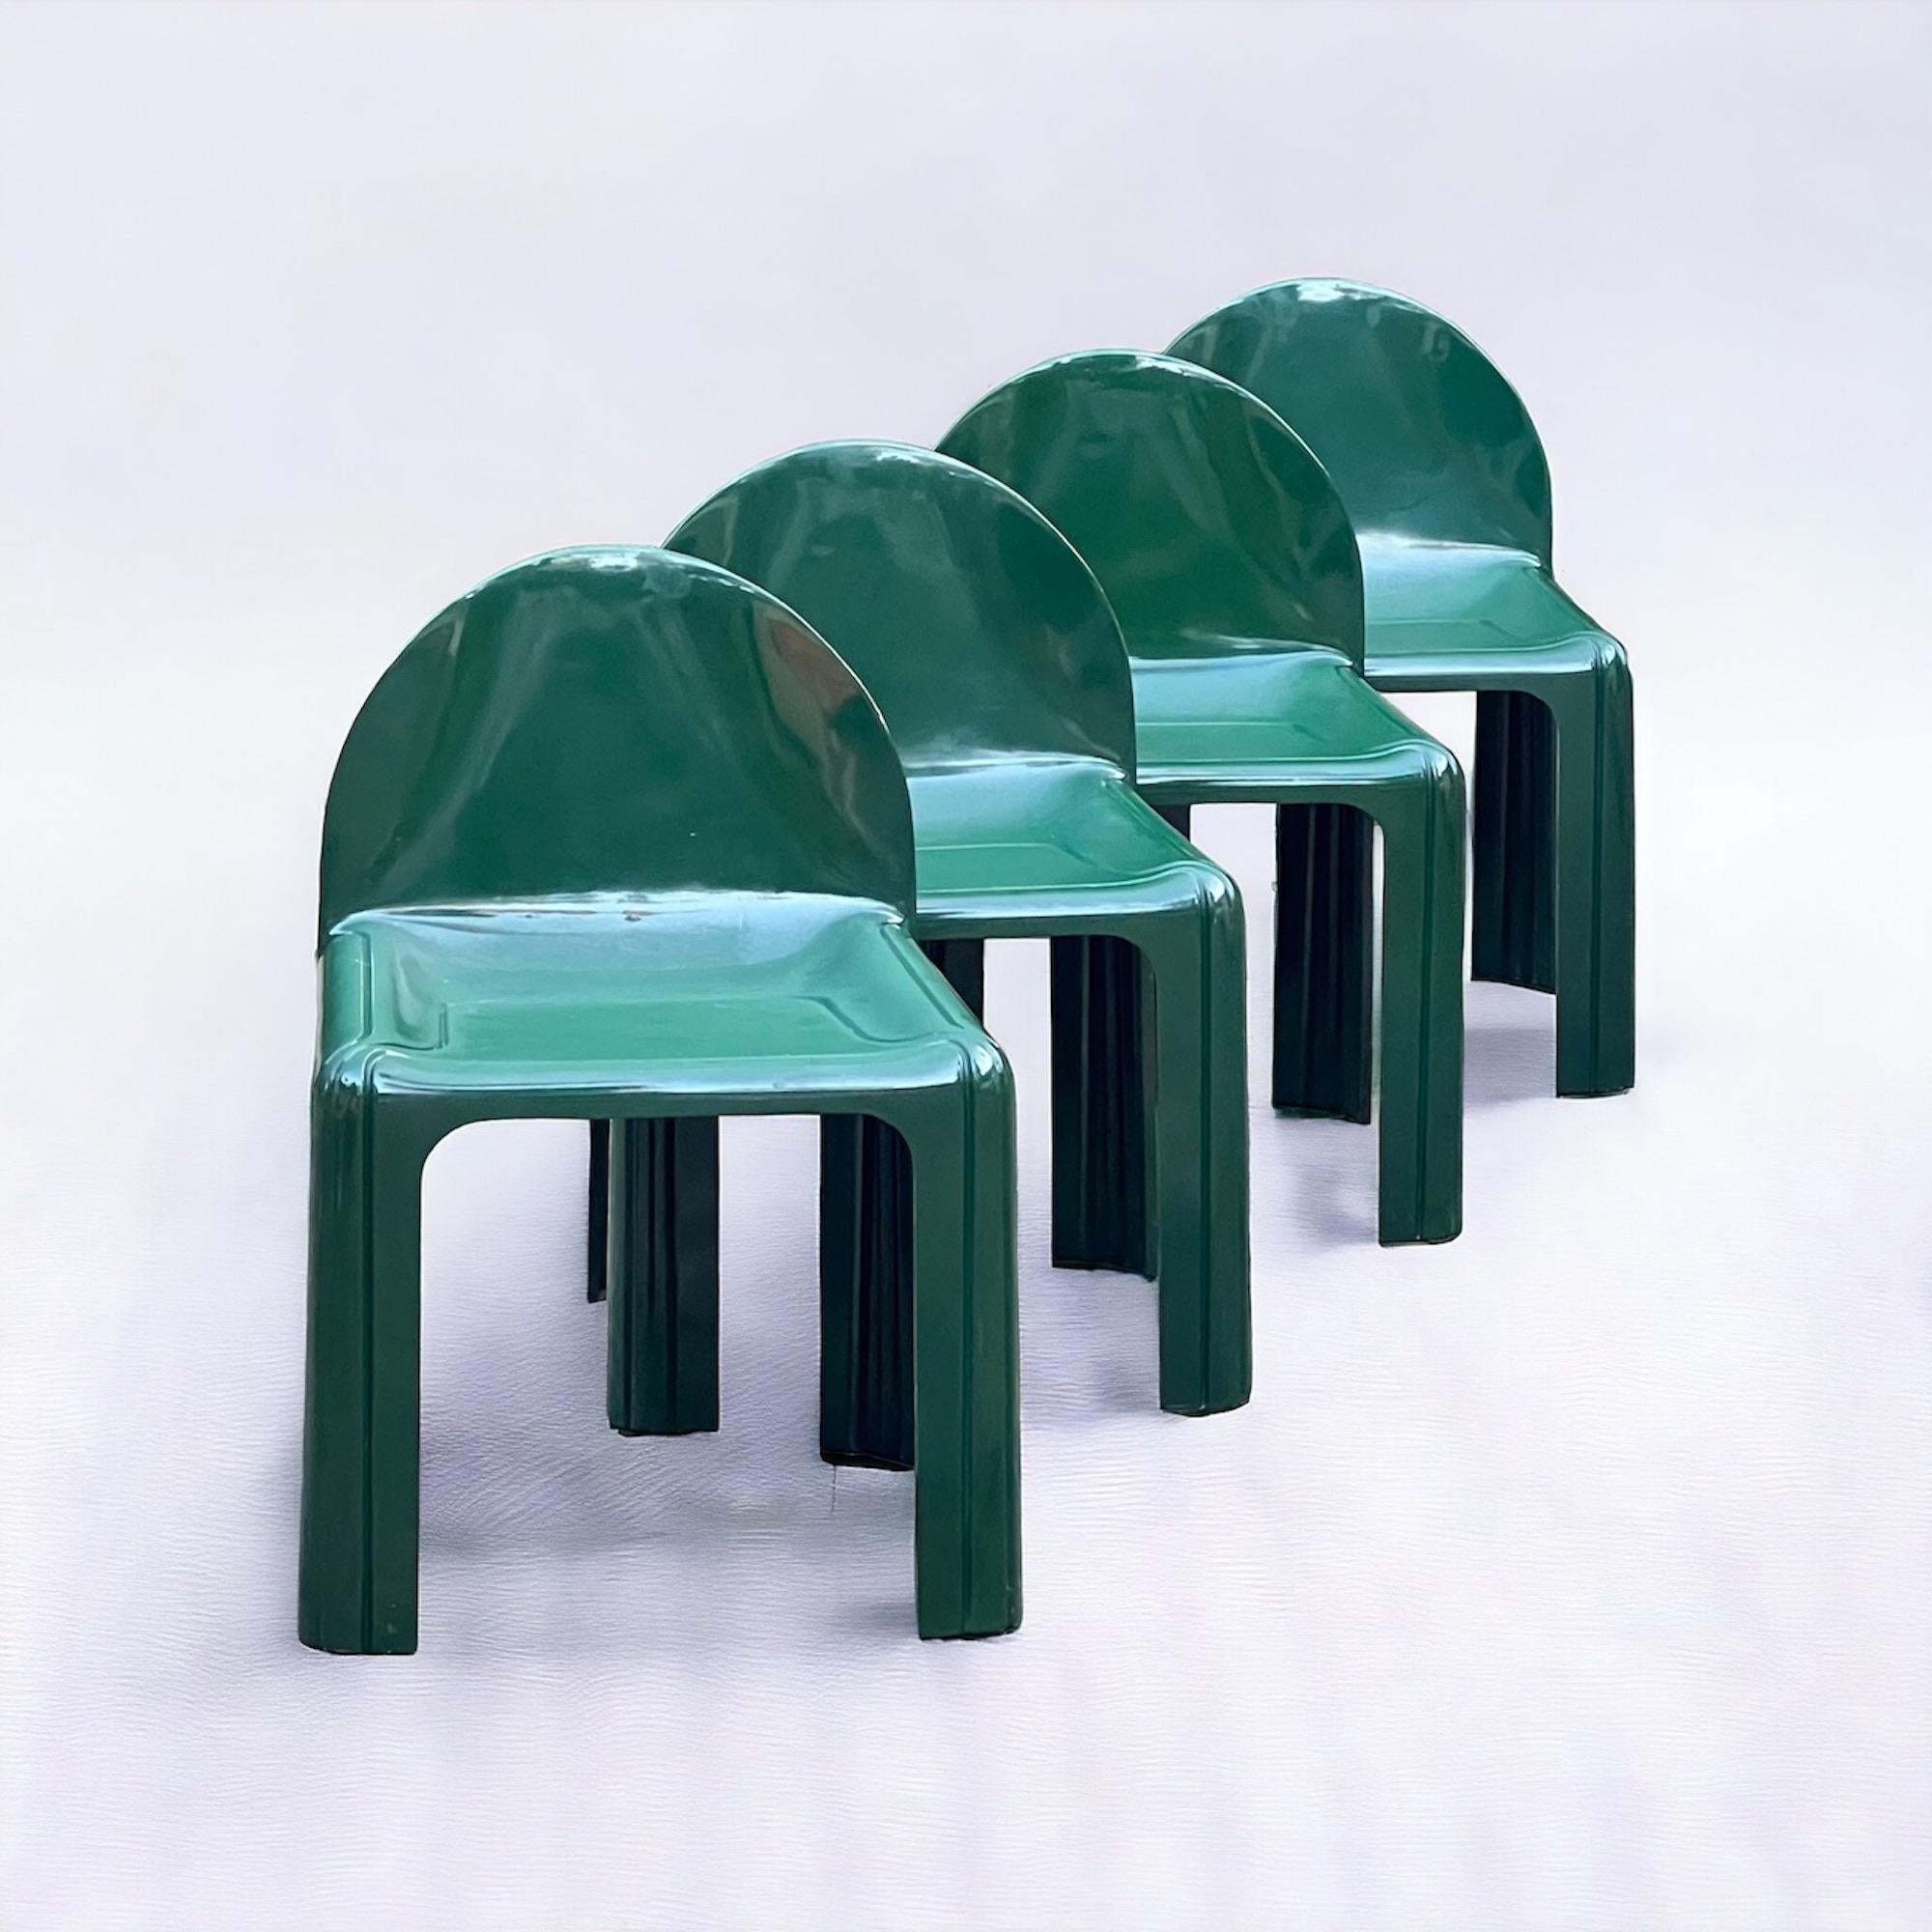 Mid-20th Century Kartell Model 4854 Chairs by Gae Aulenti, 1960s - Set of 4 - Emerald Green Resin